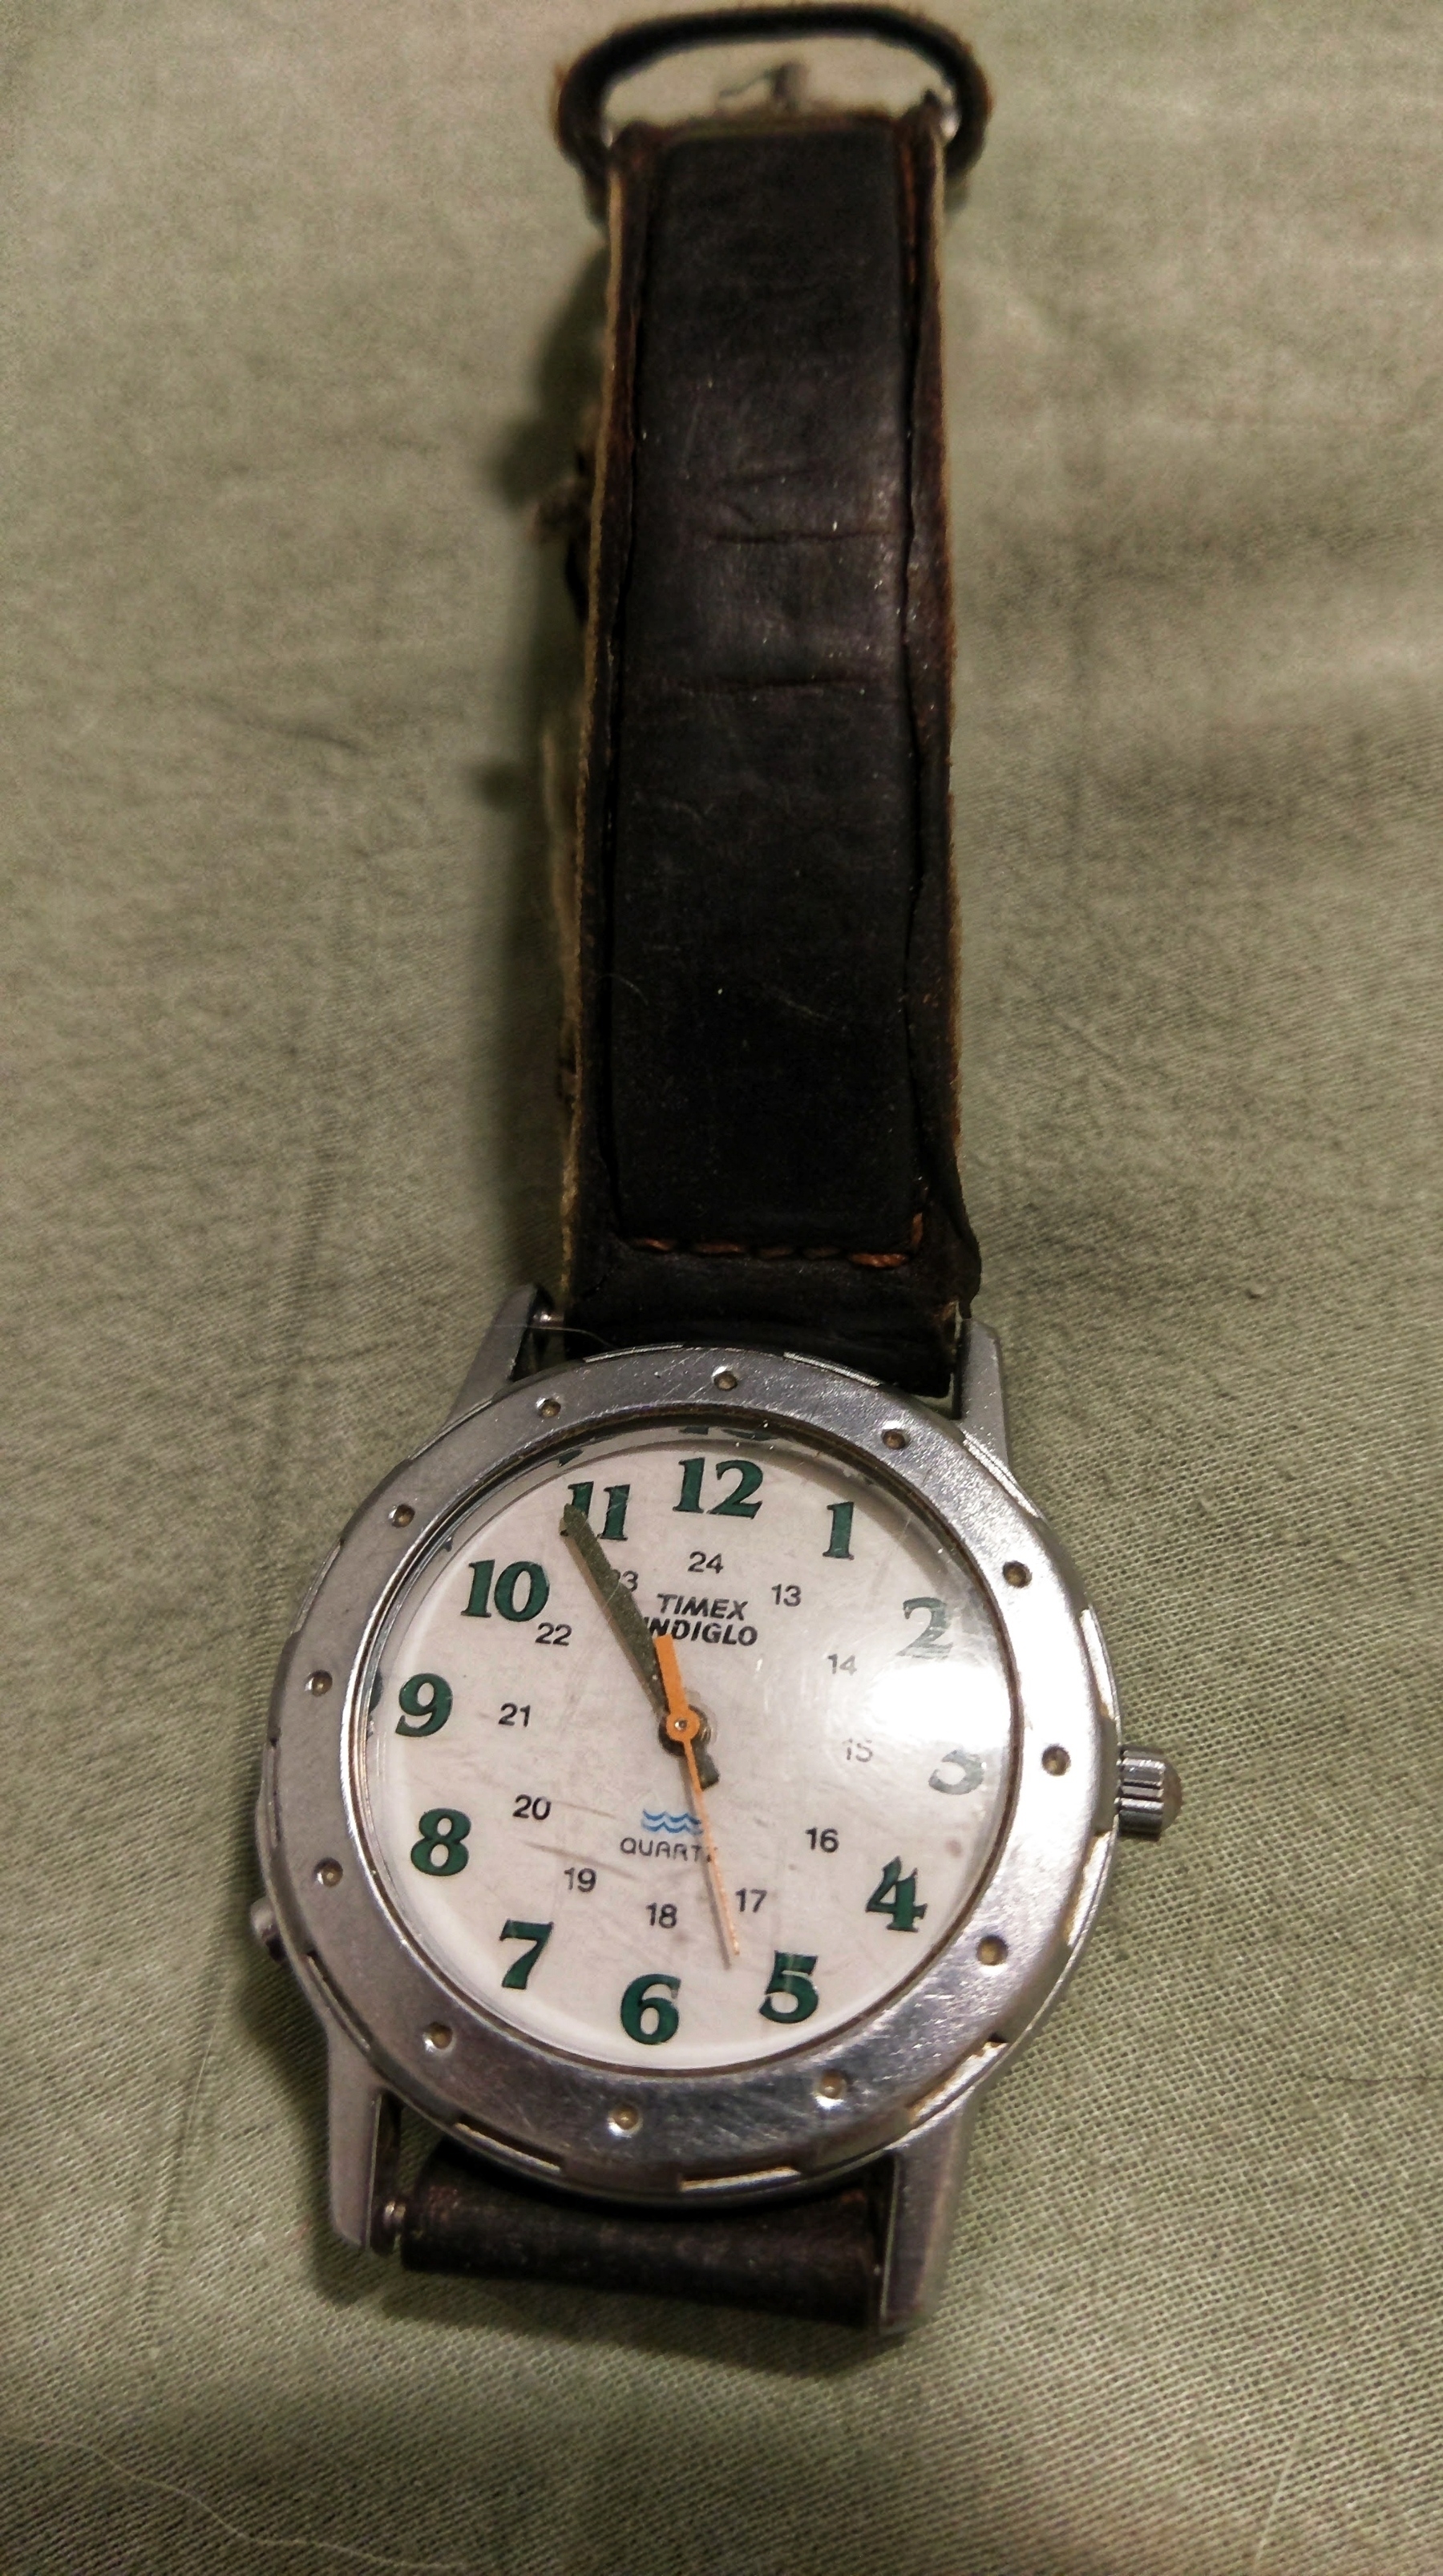 An analog Timex indiglo watch with leather wristband. 